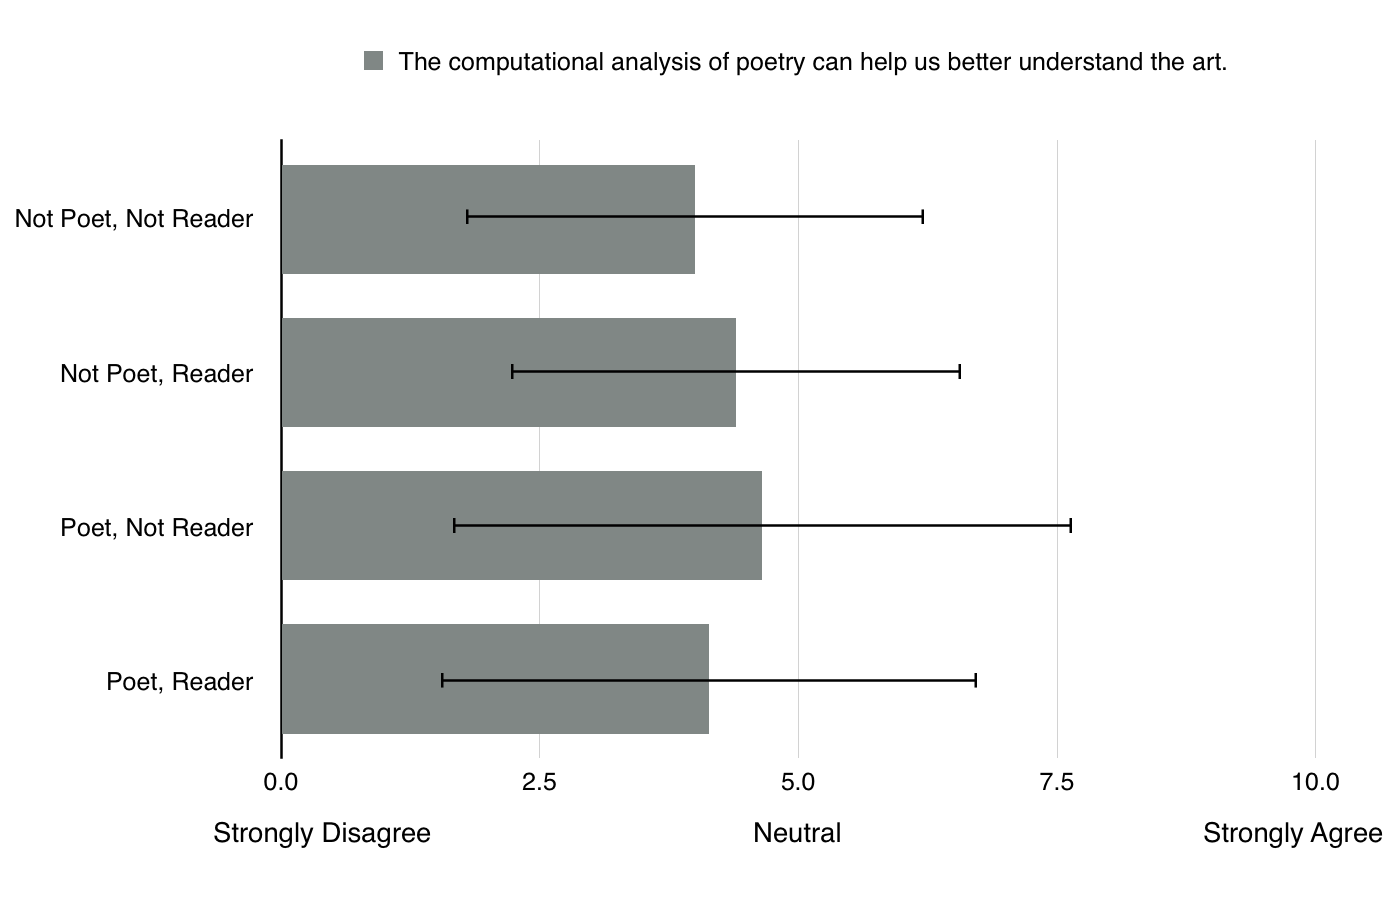 Attitudes toward benefits of computational analysis to poetry of survey participants (n=307)